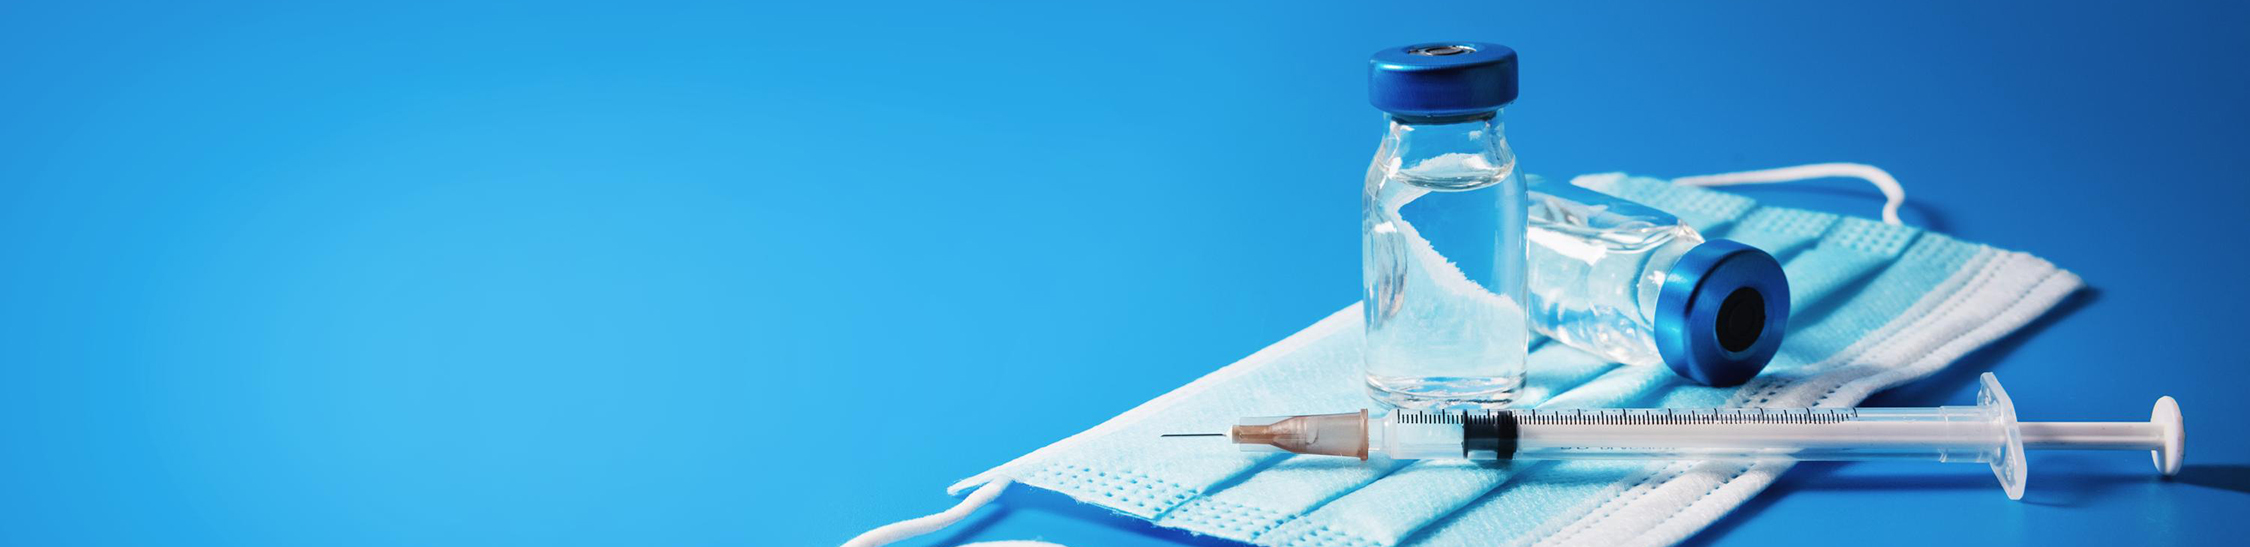 blue background with mask, needle and vital placed on the side